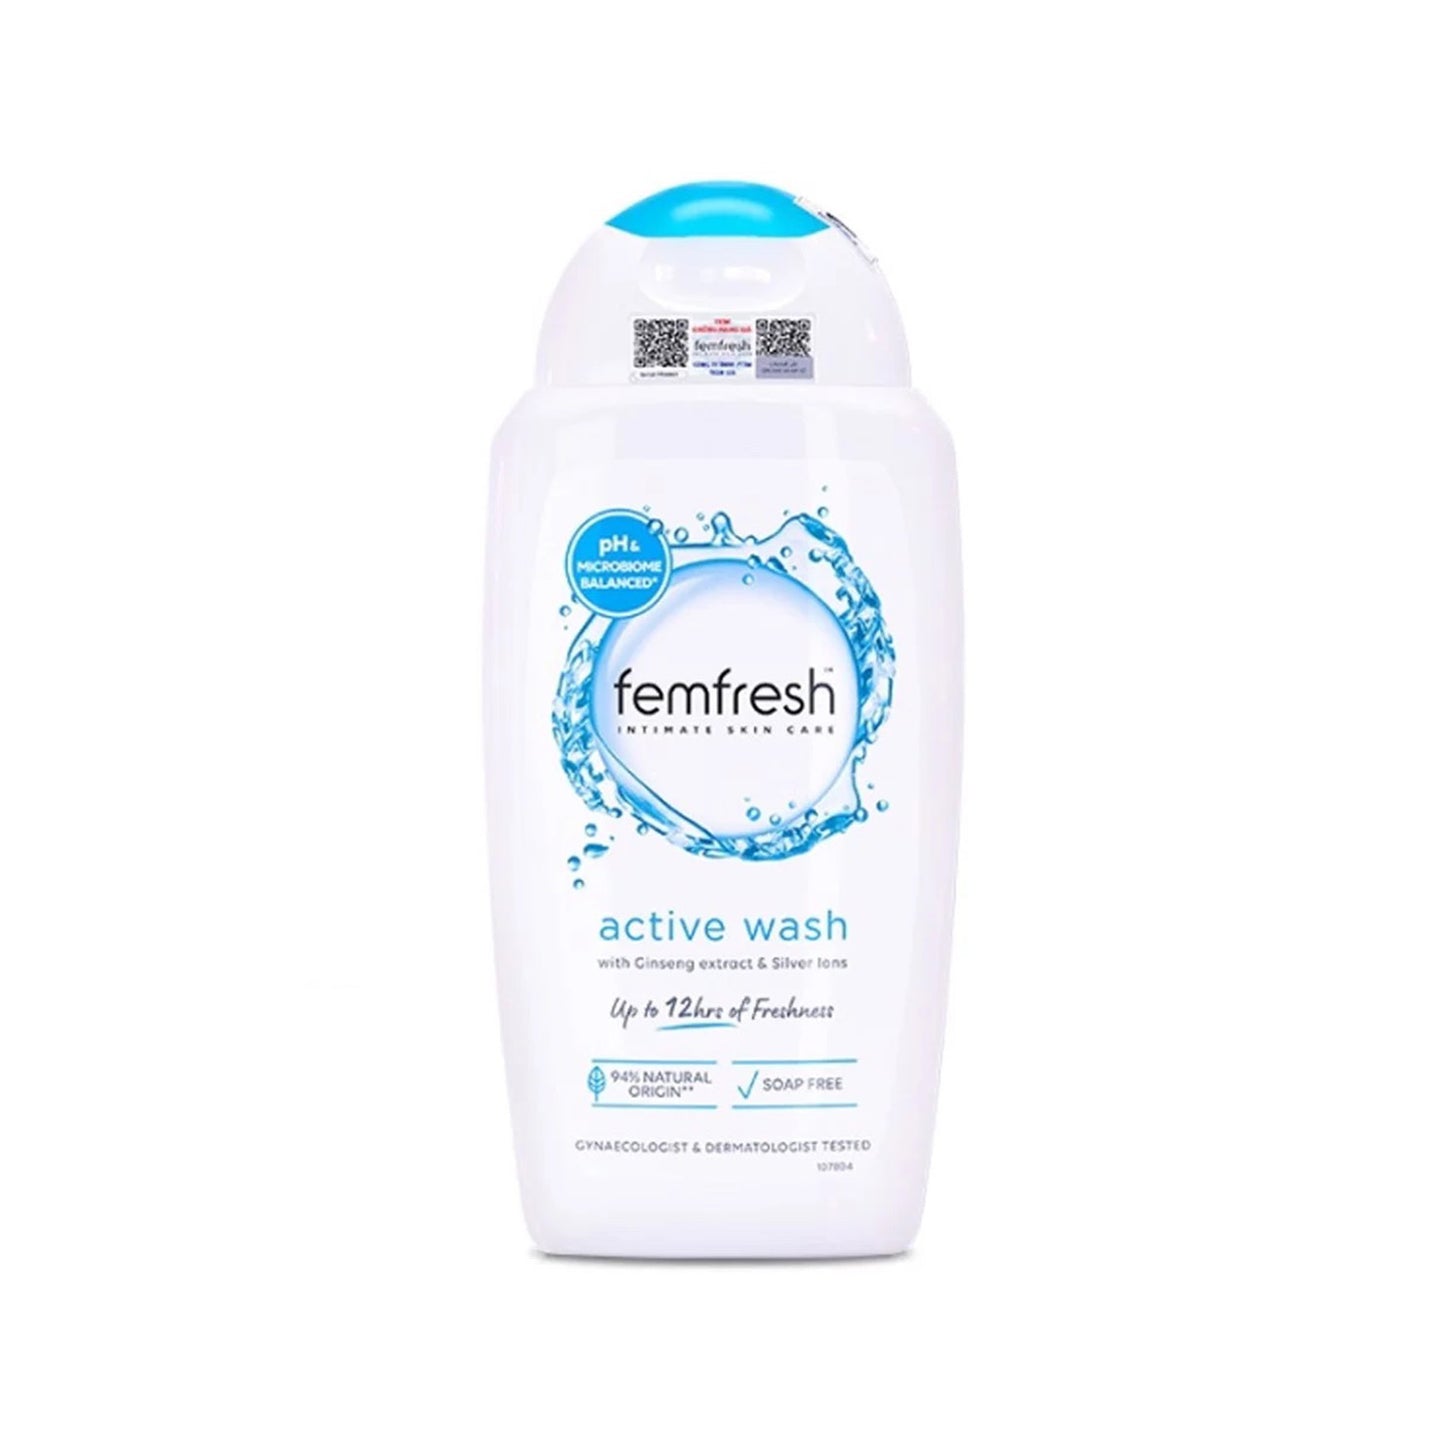 Dung Dịch Vệ Sinh Phụ Nữ Femfresh Untimate Care Active Fresh Wash 250ml